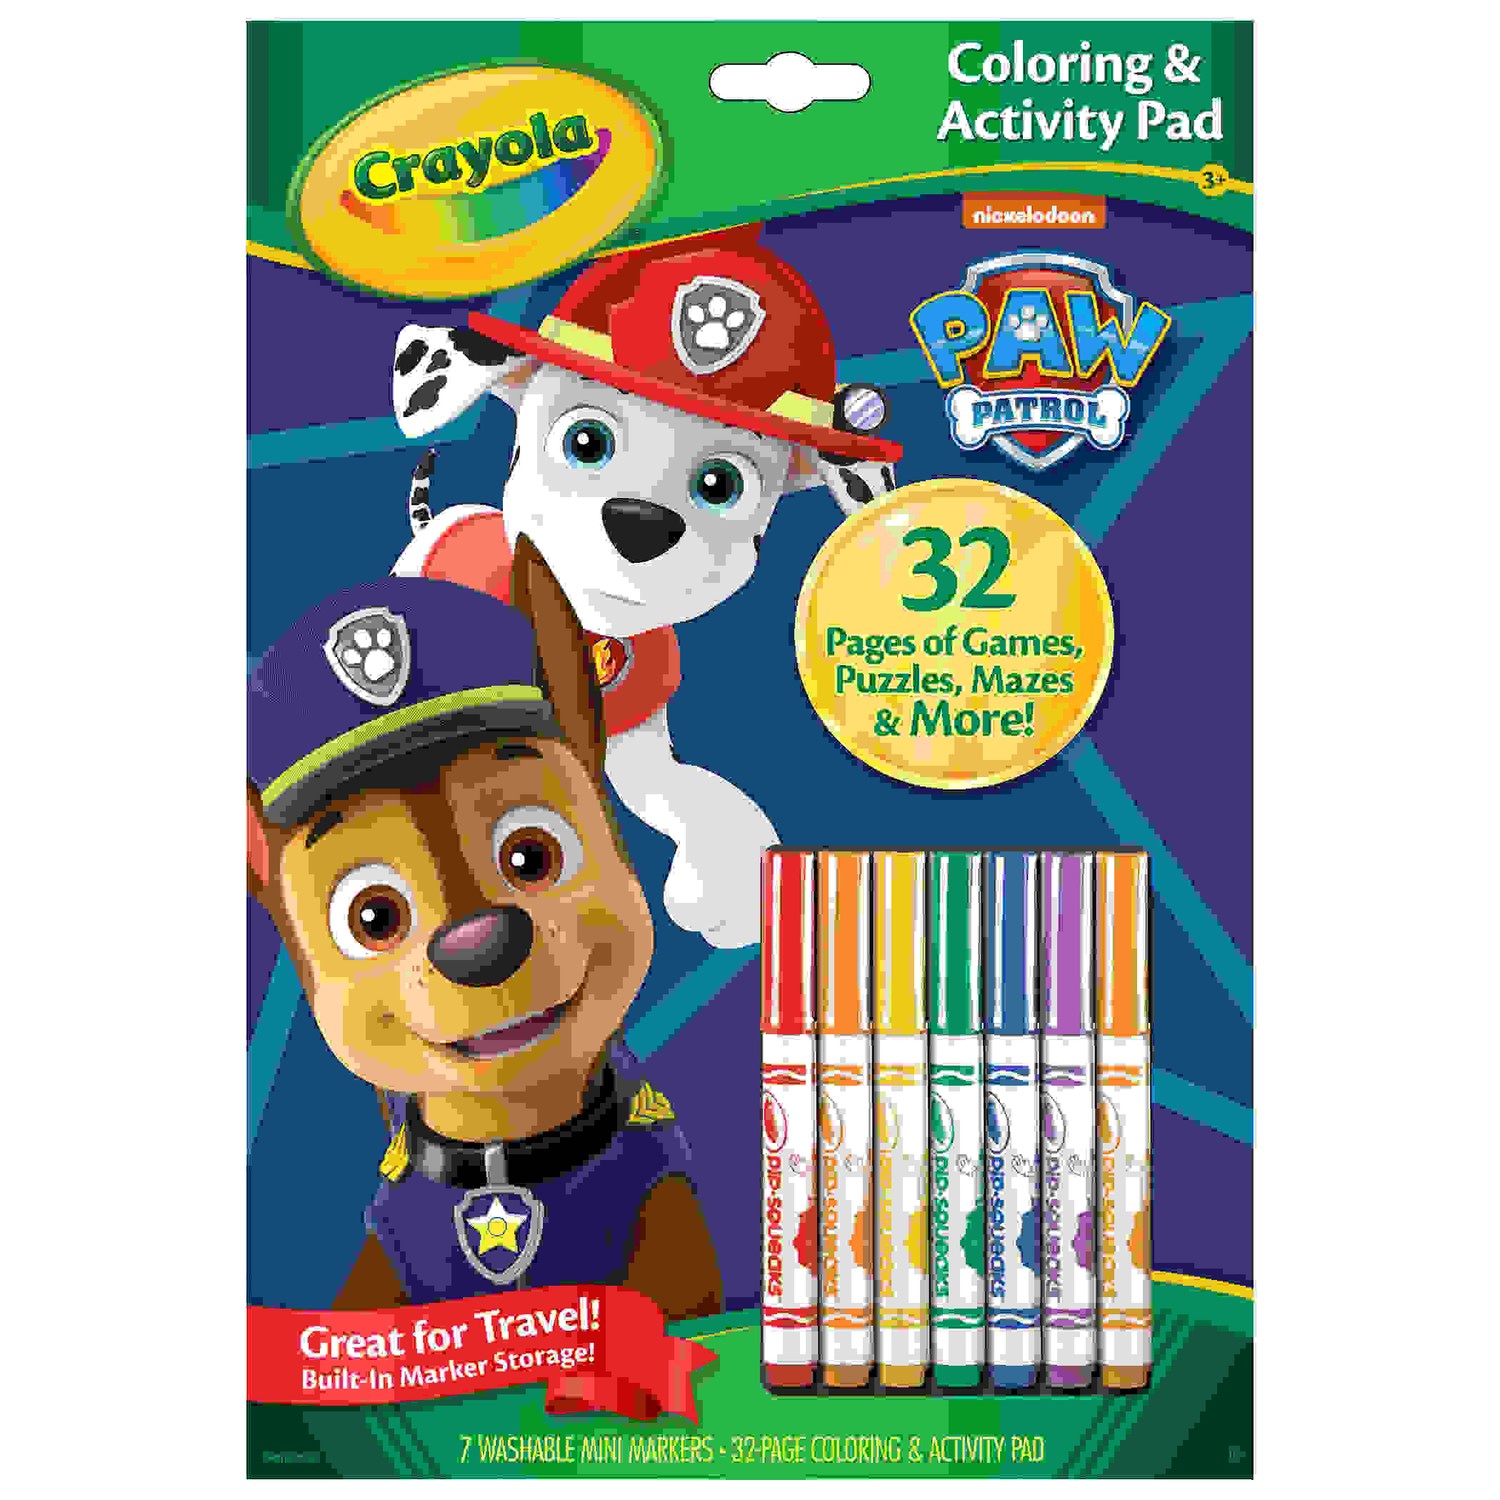 Coloring & Activity Pad with Markers, Paw Patrol